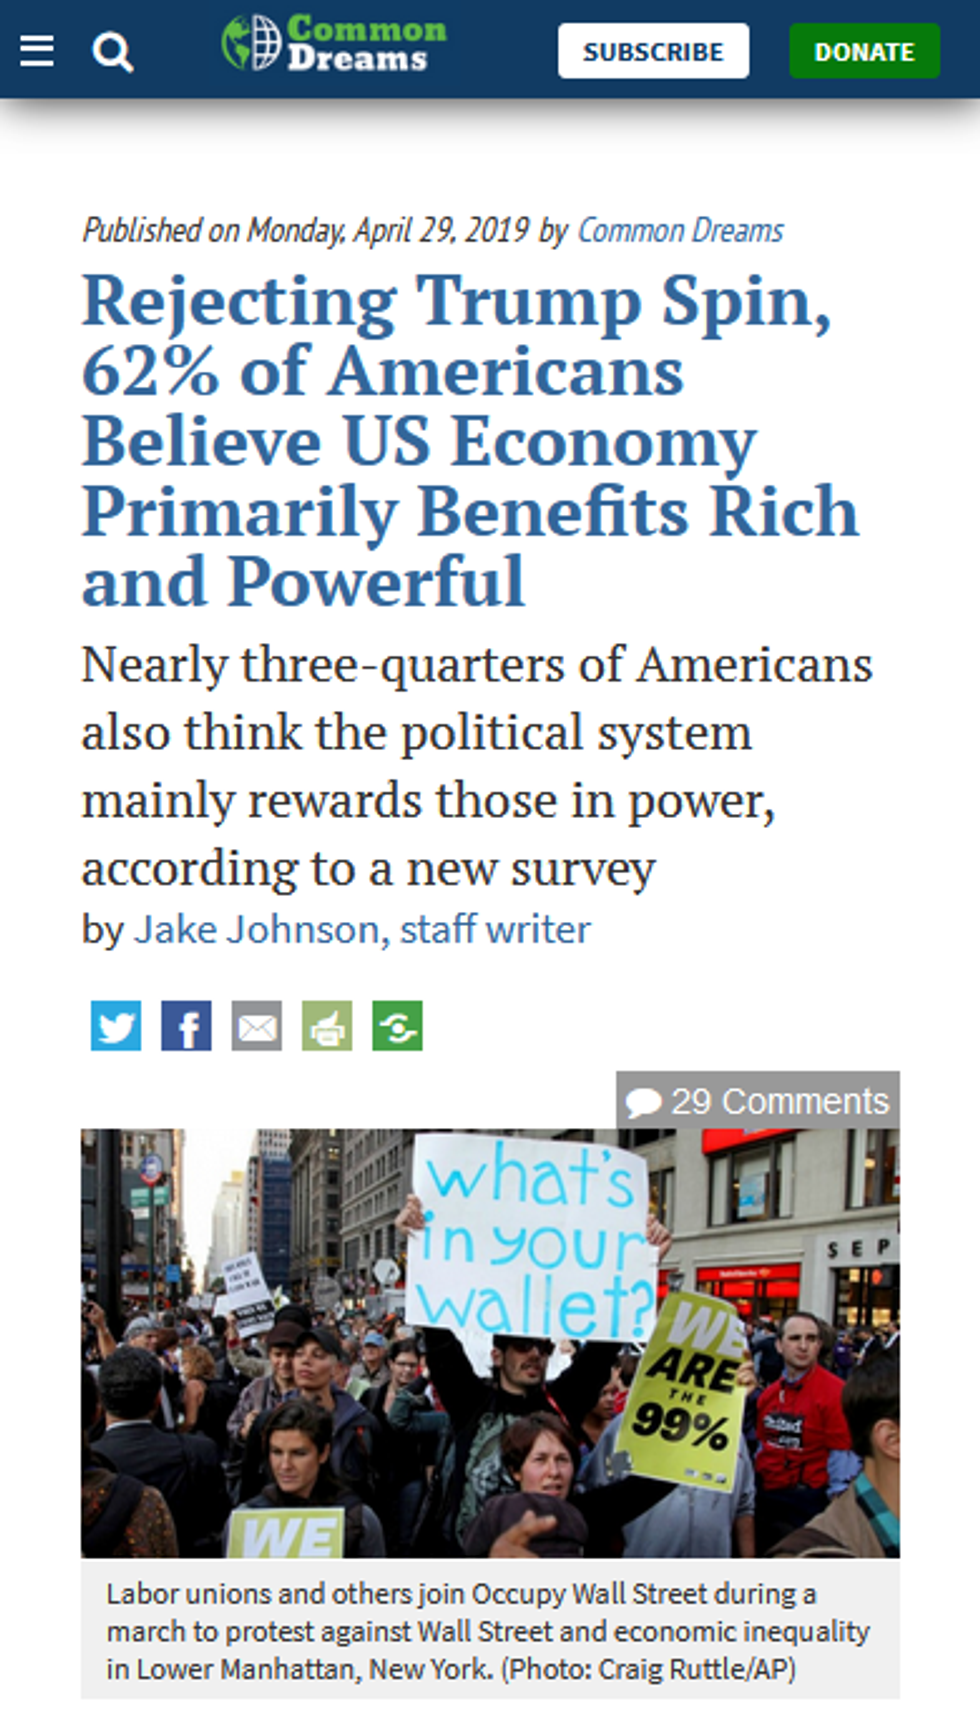 Common Dreams: Rejecting Trump Spin, 62% of Americans Believe US Economy Primarily Benefits Rich and Powerful